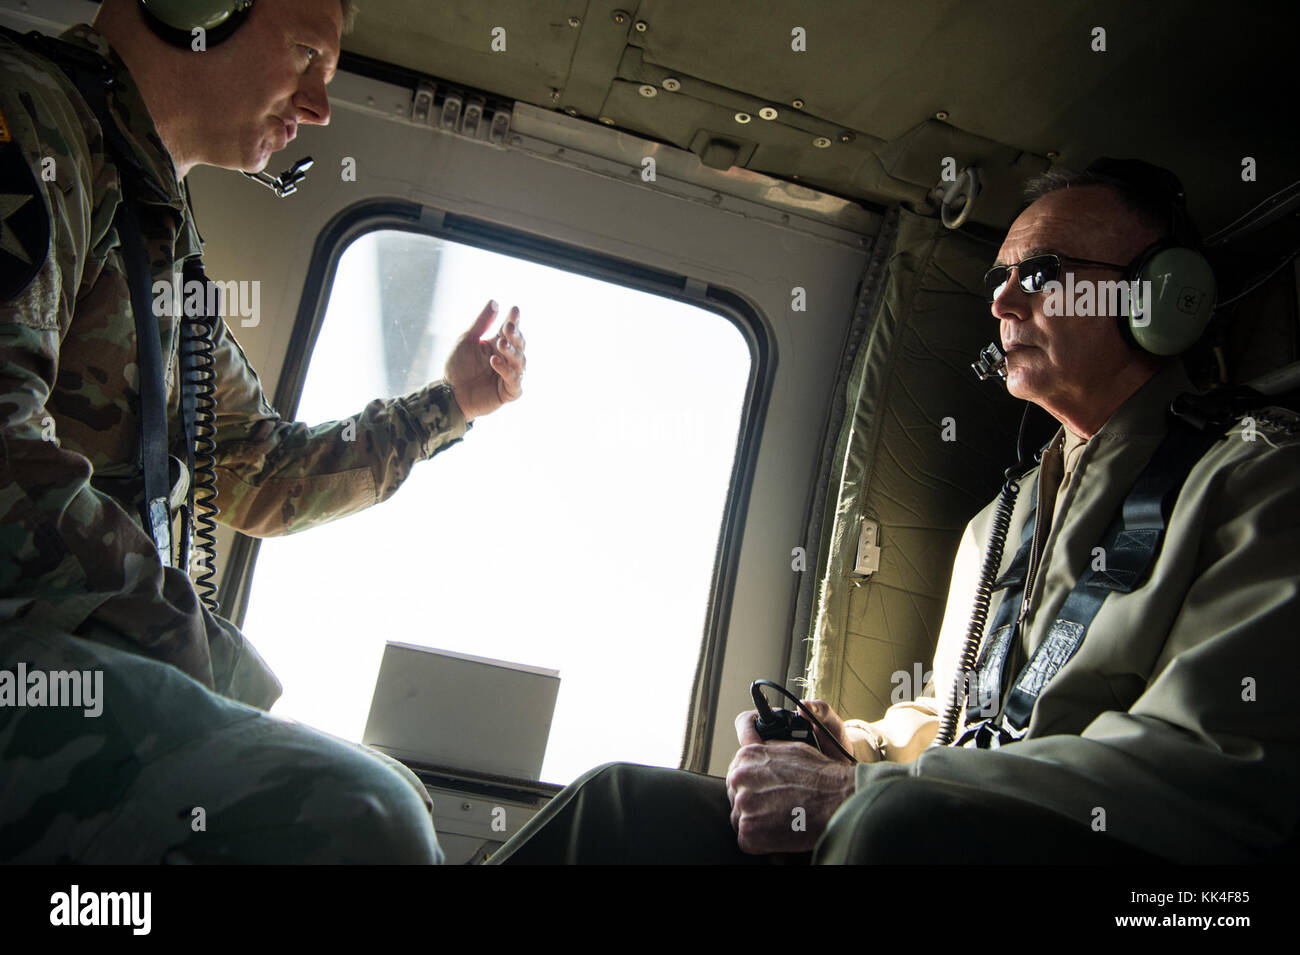 Marine Corps Gen. Joseph F. Dunford Jr., chairman of the Joint Chiefs of Staff, speaks with Army Command Sgt. Maj. John W. Troxell, senior enlisted advisor to the chairman of the Joint Chiefs of Staff, during a helo ride aboard an MH-60 Blackhawk above Seoul, Republic of Korea, Oct. 28, 2017. (DOD photo by Navy Petty Officer 1st Class Dominique A. Pineiro) Stock Photo